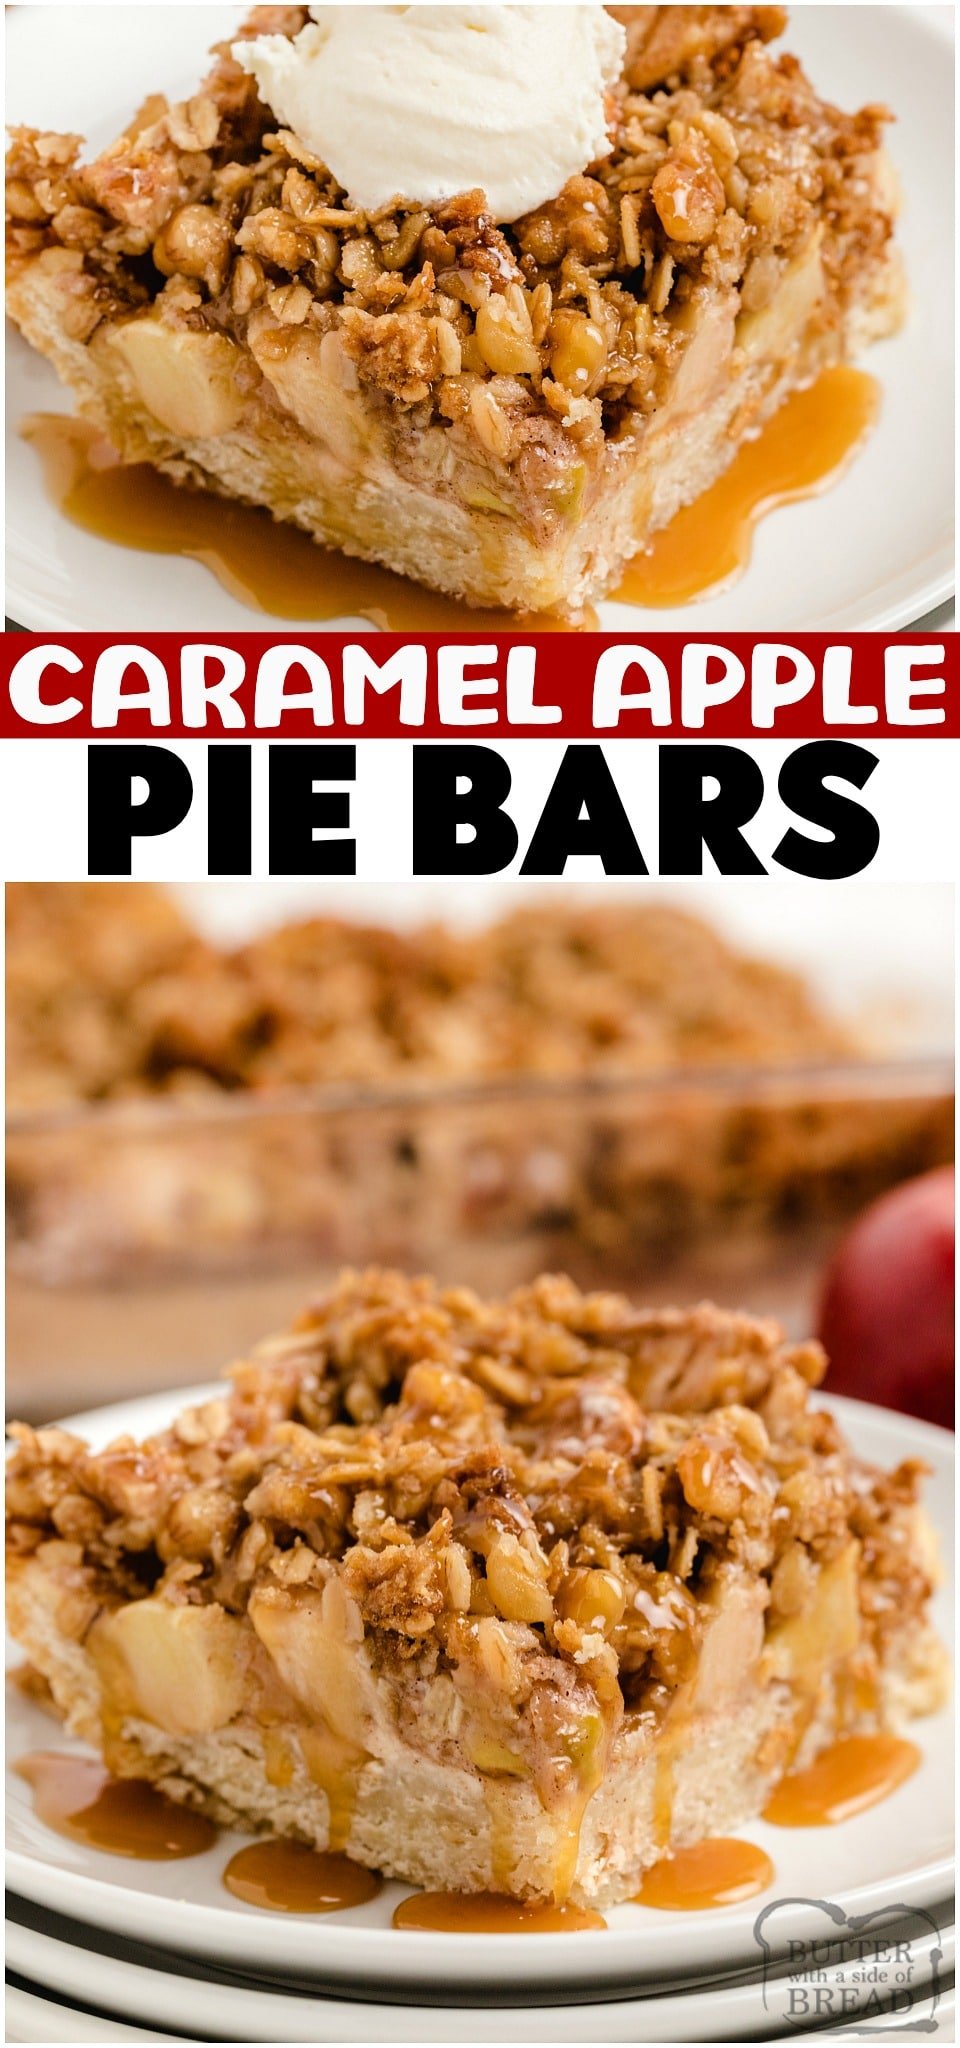 Apple Pie Bars topped with a buttery crumble & drizzled with caramel for a fantastic take on a classic apple pie! Perfect baked apples recipe for a no-fuss alternative to apple pie. Apple pie bars are easier to make, simple to serve and everyone loves them!